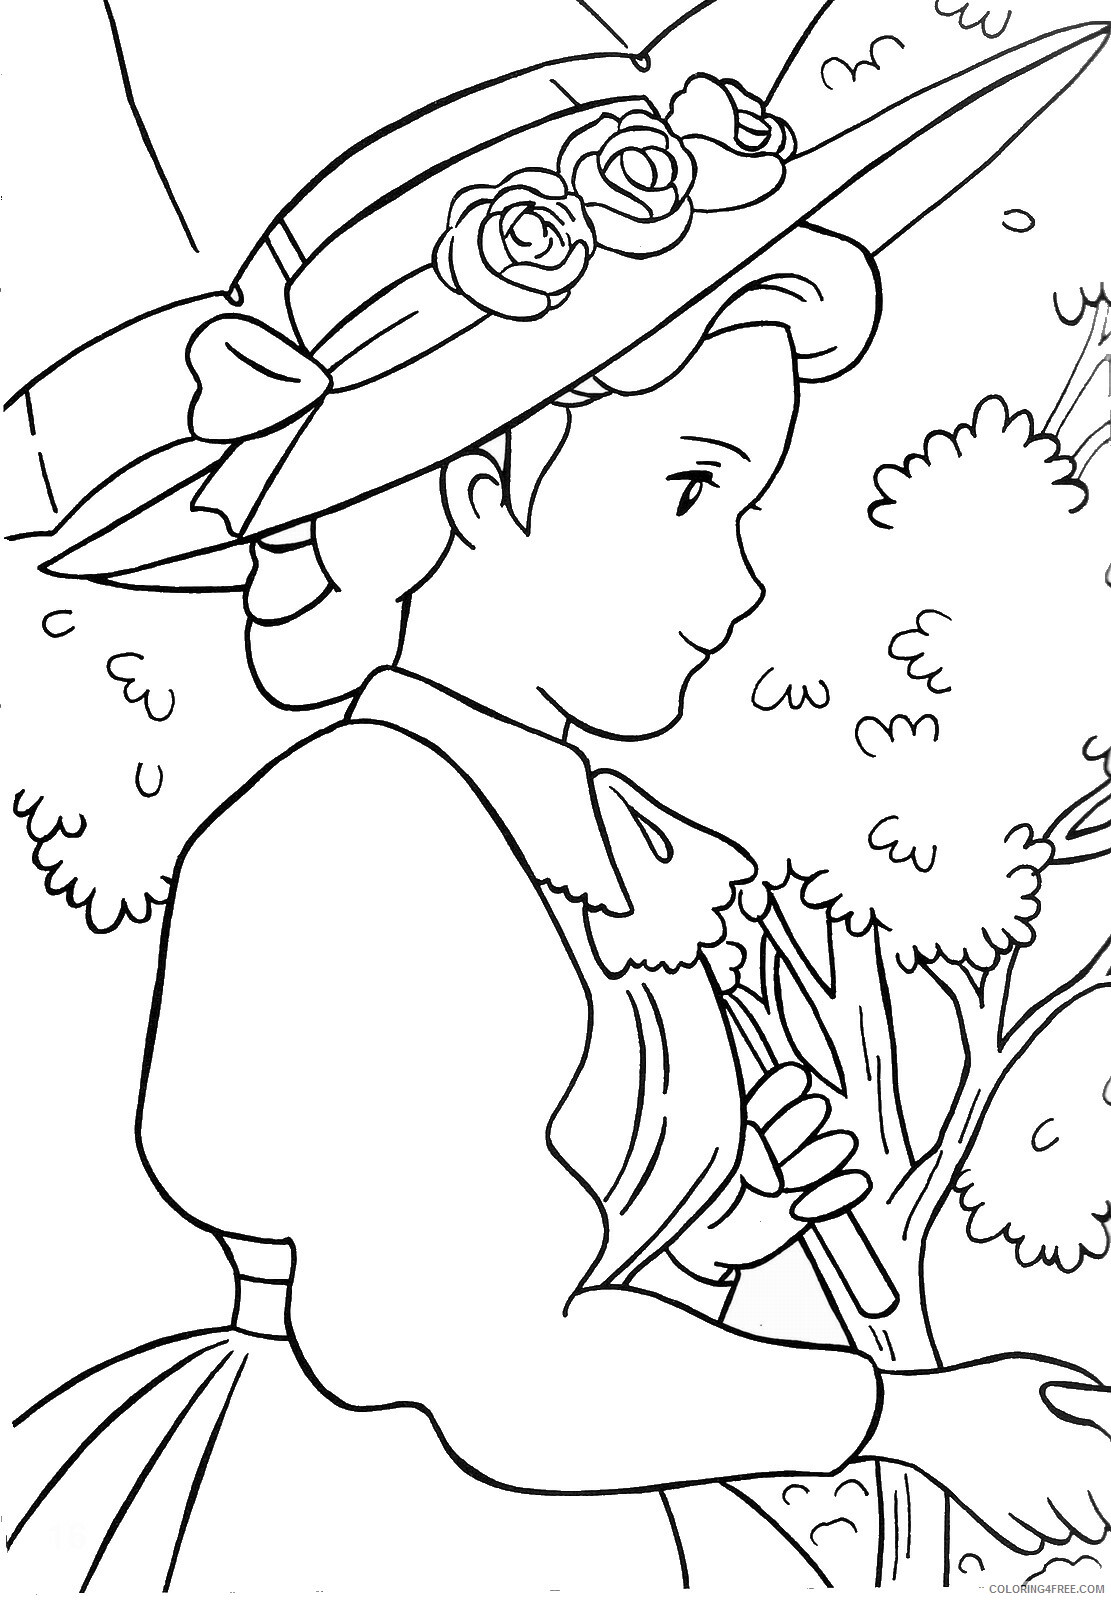 Anne of Green Gables Coloring Pages TV Film anne green gables 16 Printable 2020 00143 Coloring4free